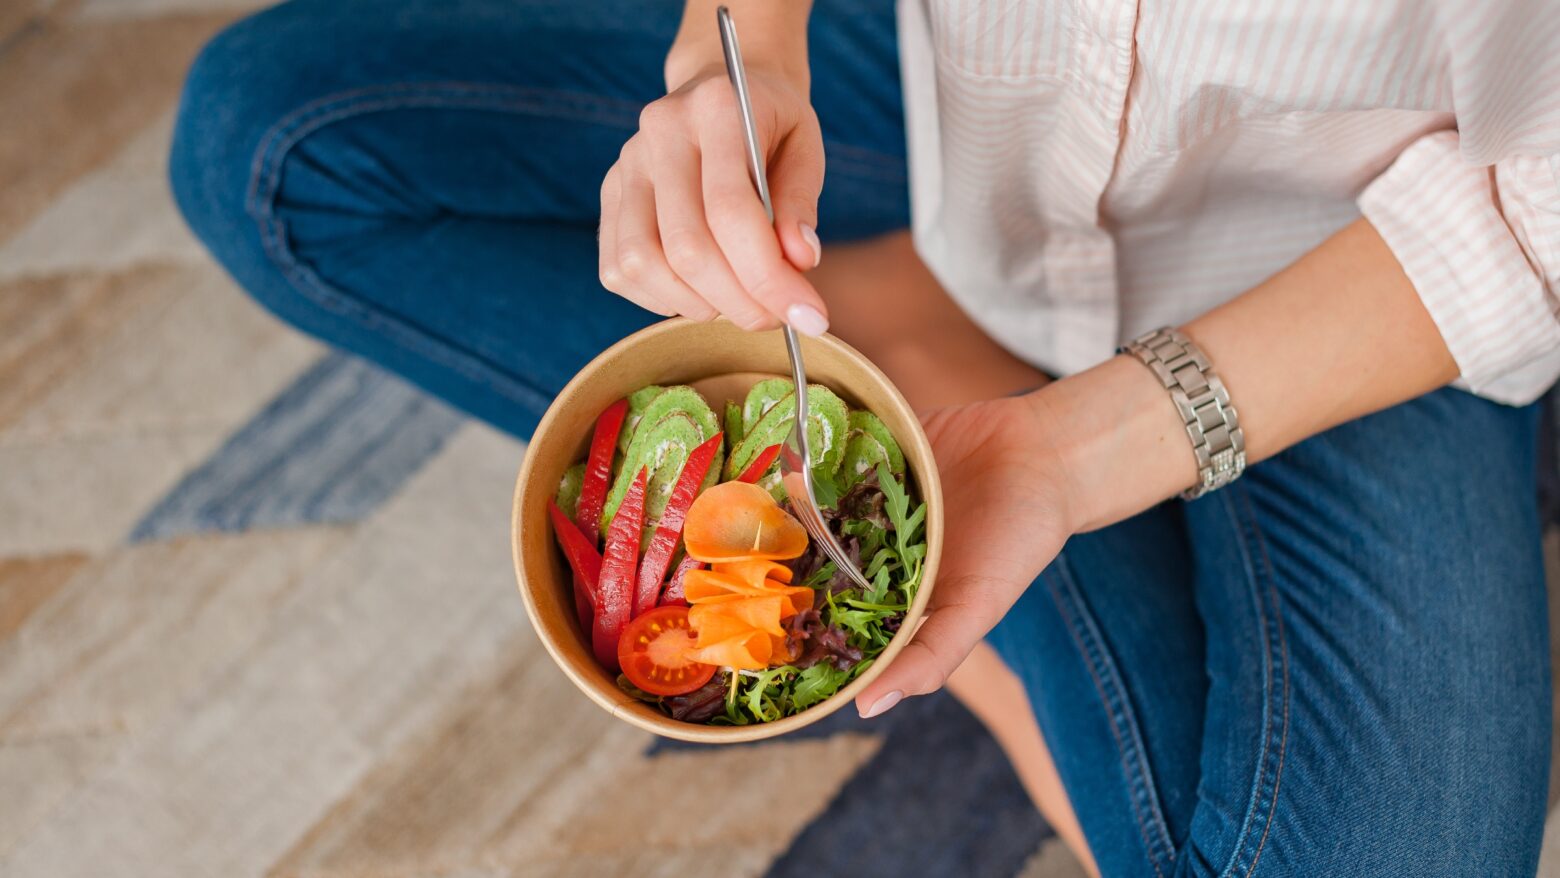 Woman eating a salad out of a paper bowl